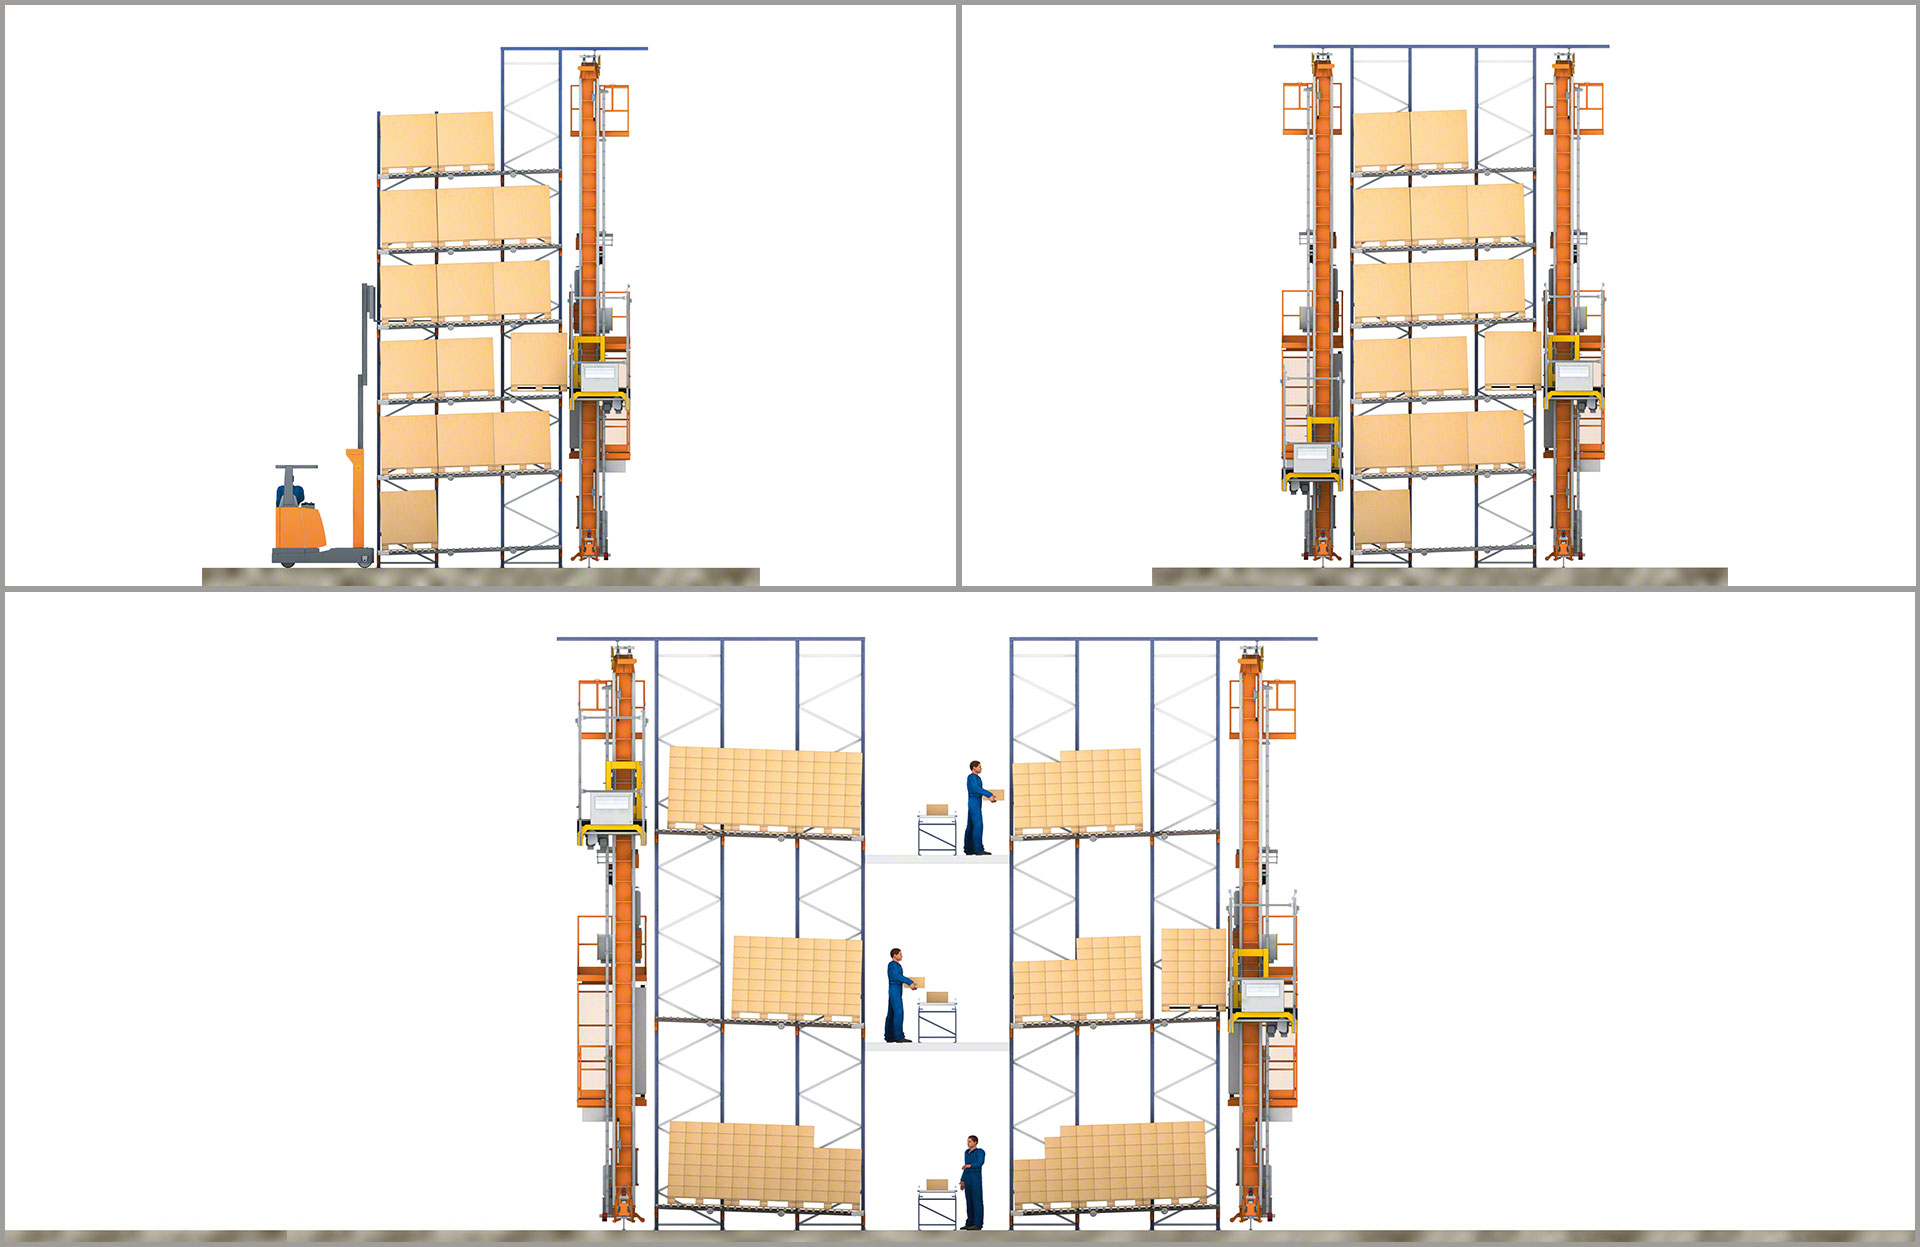 Stacker cranes can automate pallet loading and unloading in pallet flow racking